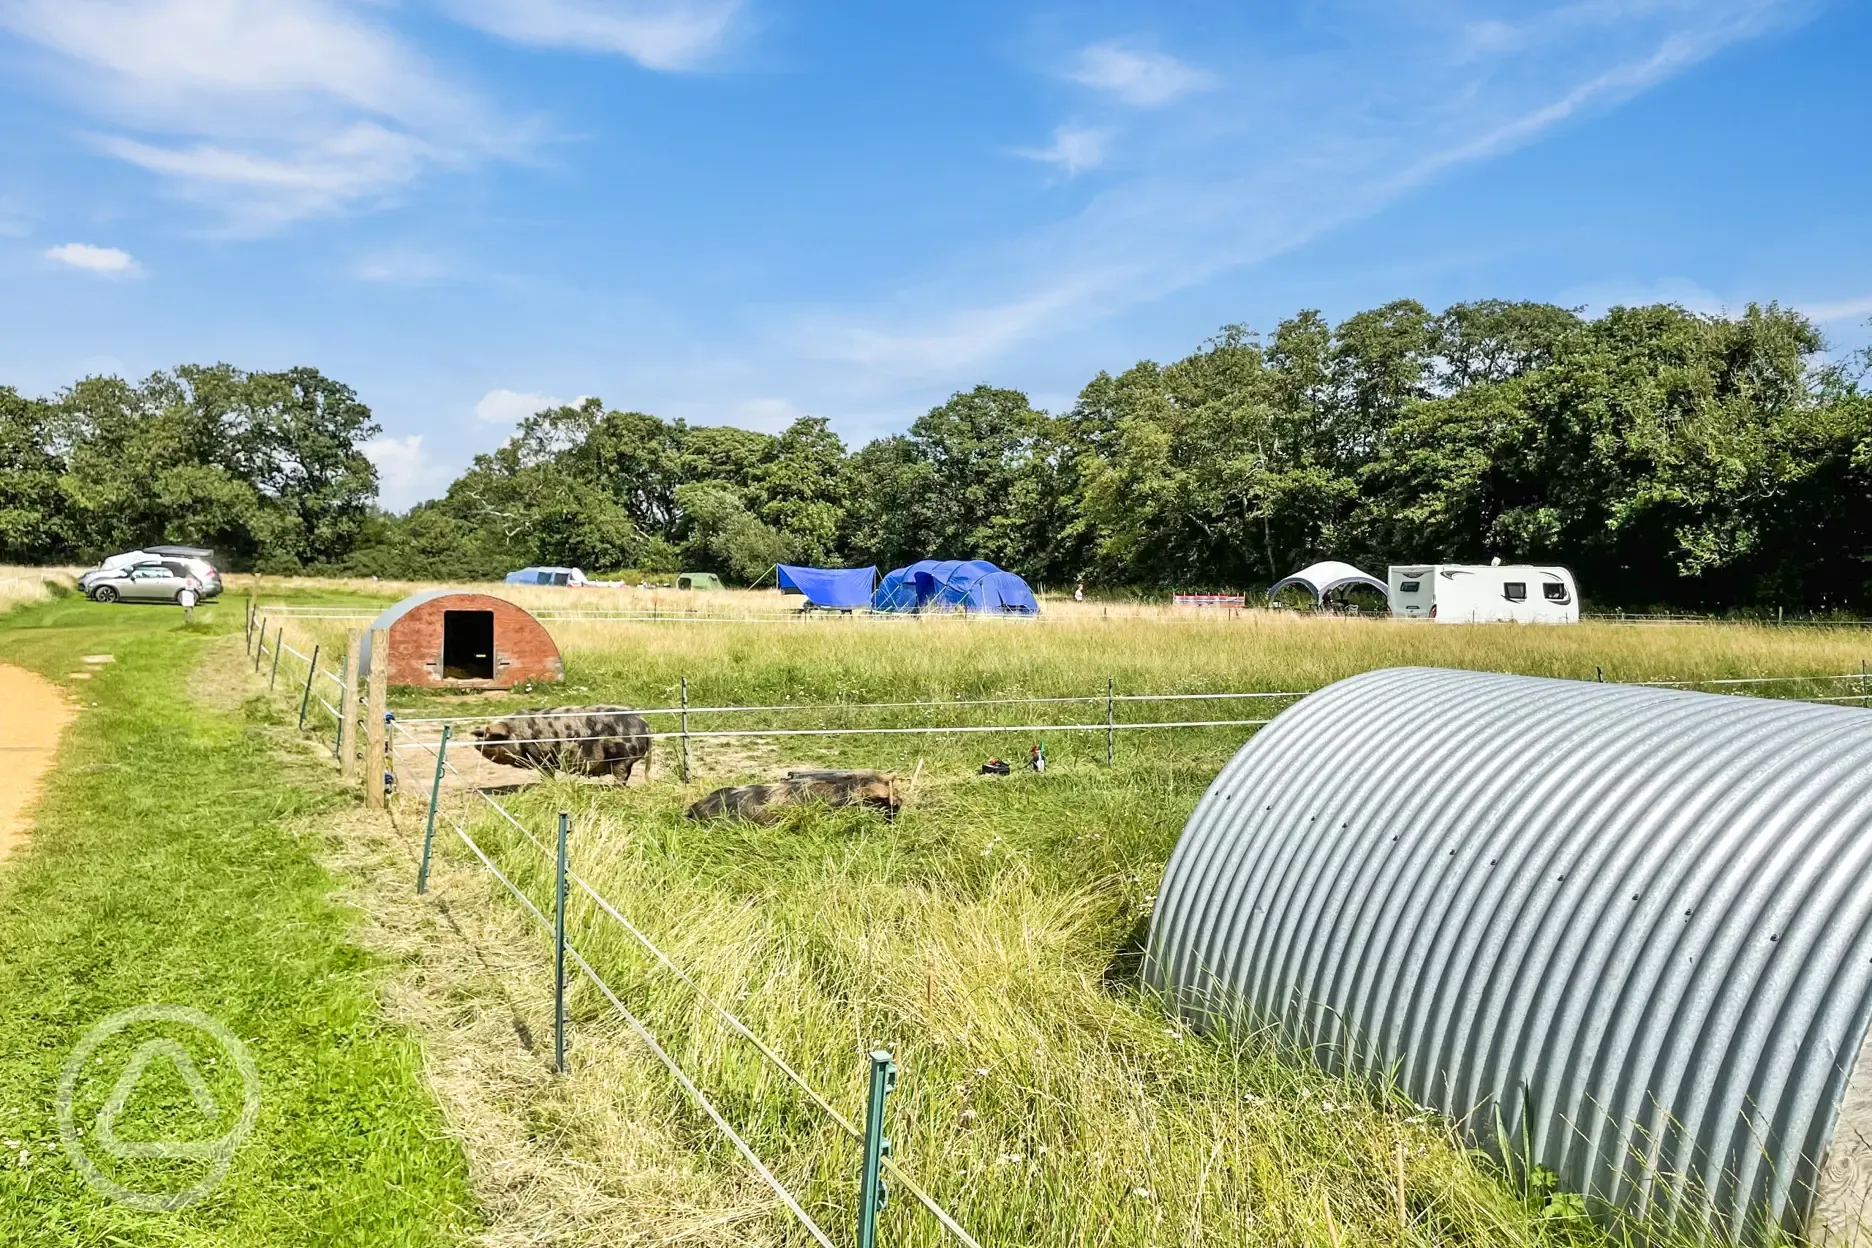 Non electric grass tent pitches and neighbouring pigs